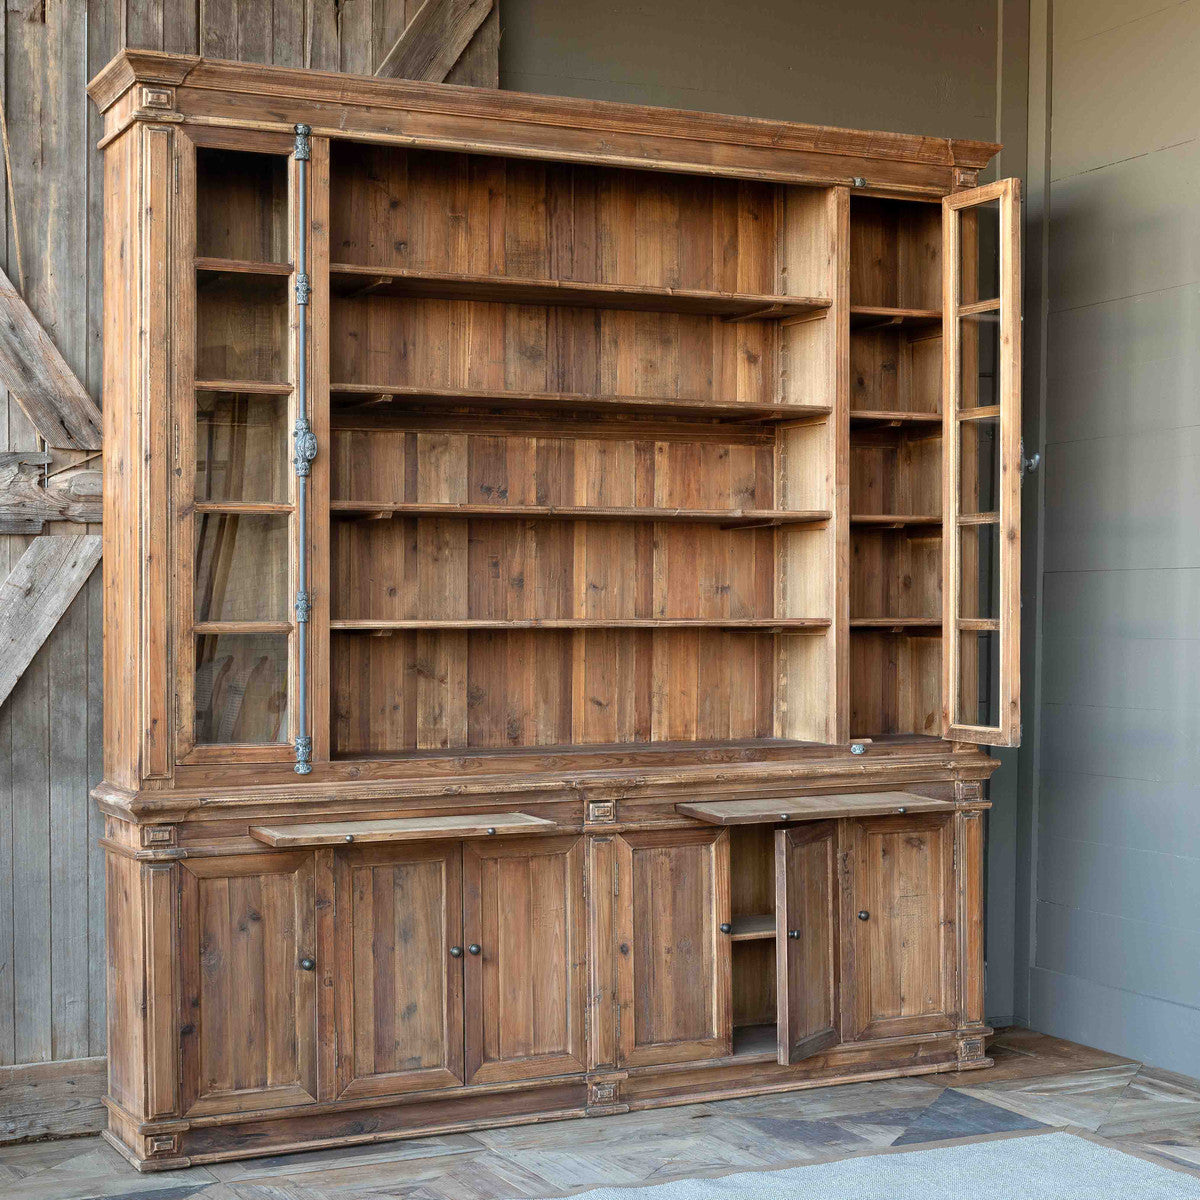 Open Shelving Display Cabinet - Store Display - Furniture on Main